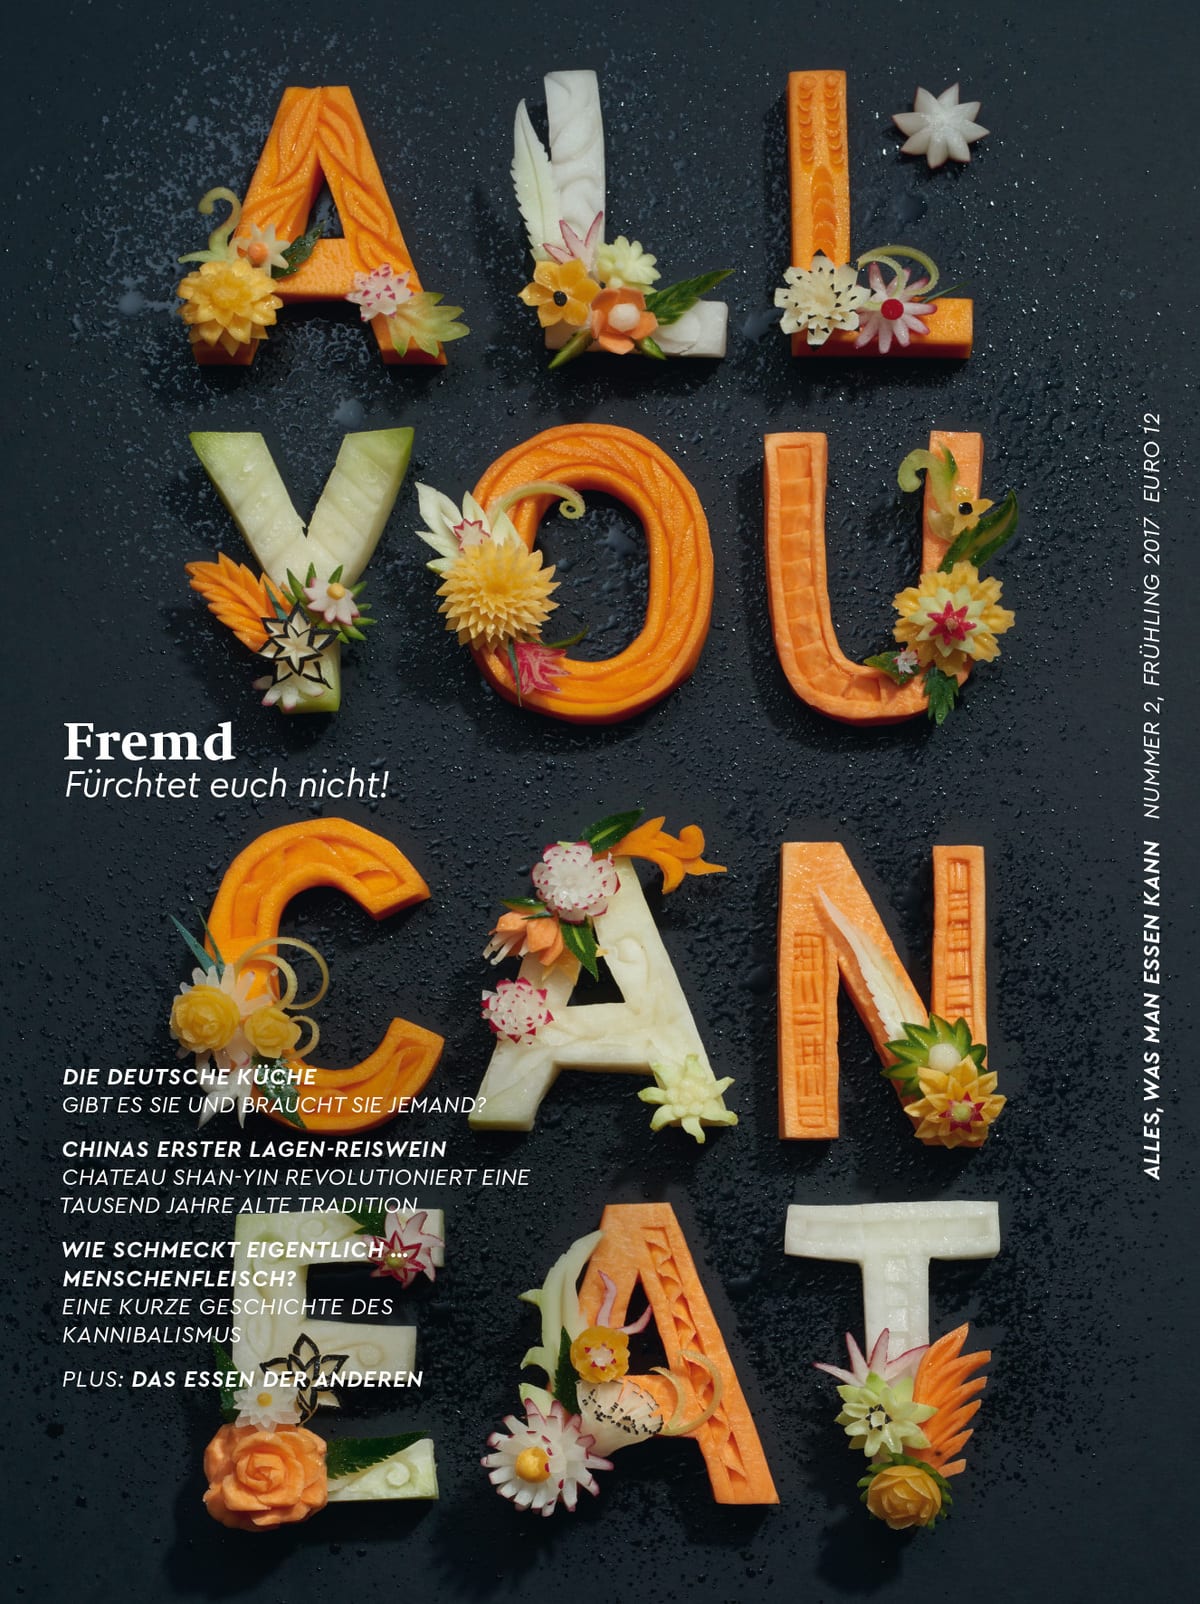 AllYouCanEat 02 FREMD Cover